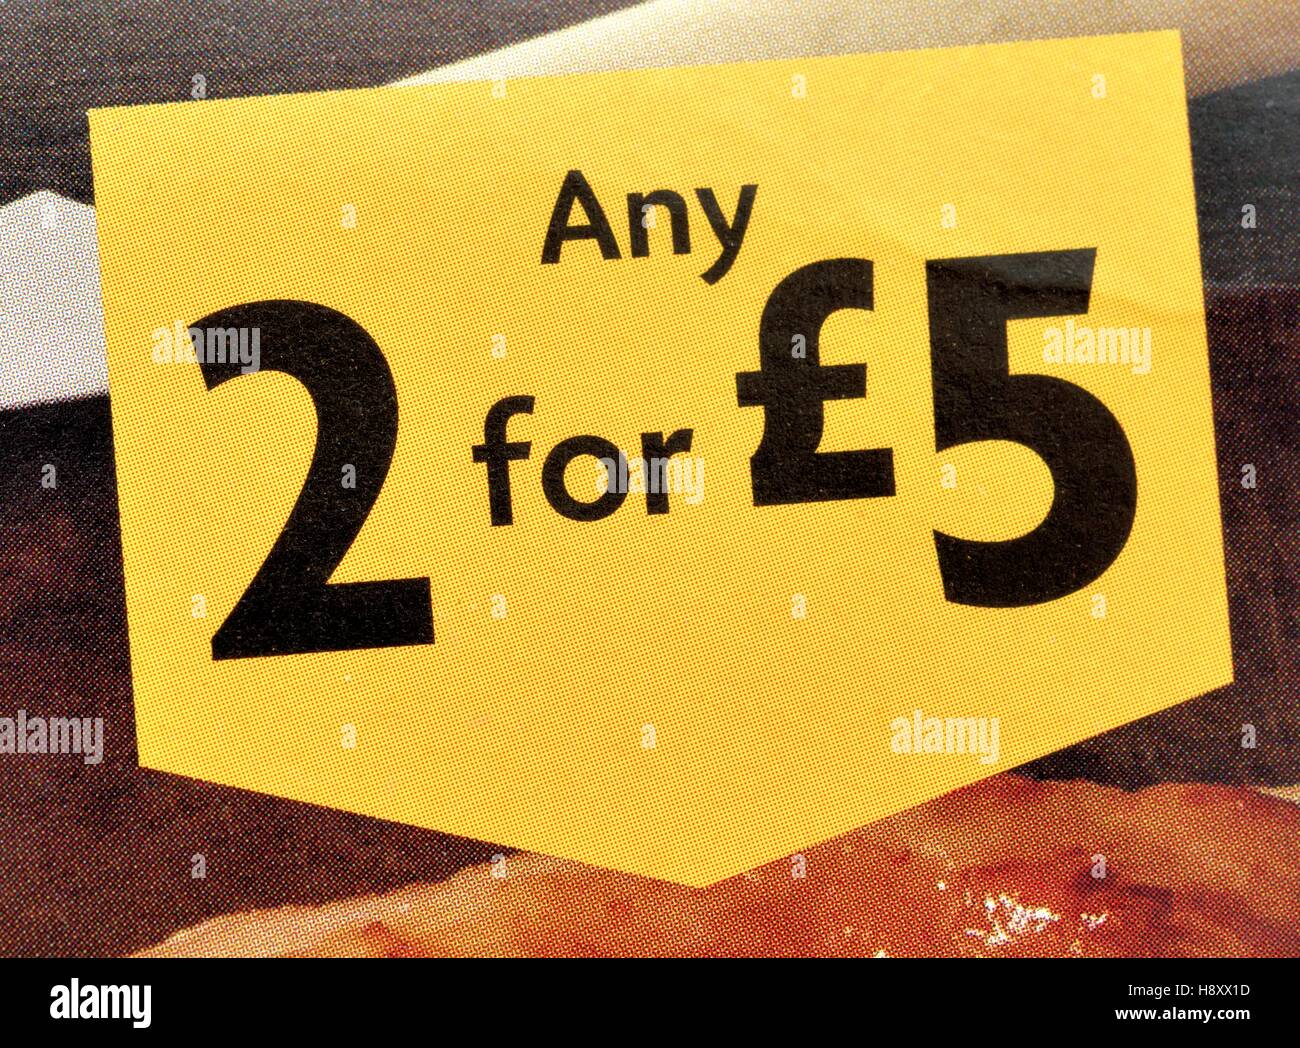 2 for £5 offer on a meat product Stock Photo